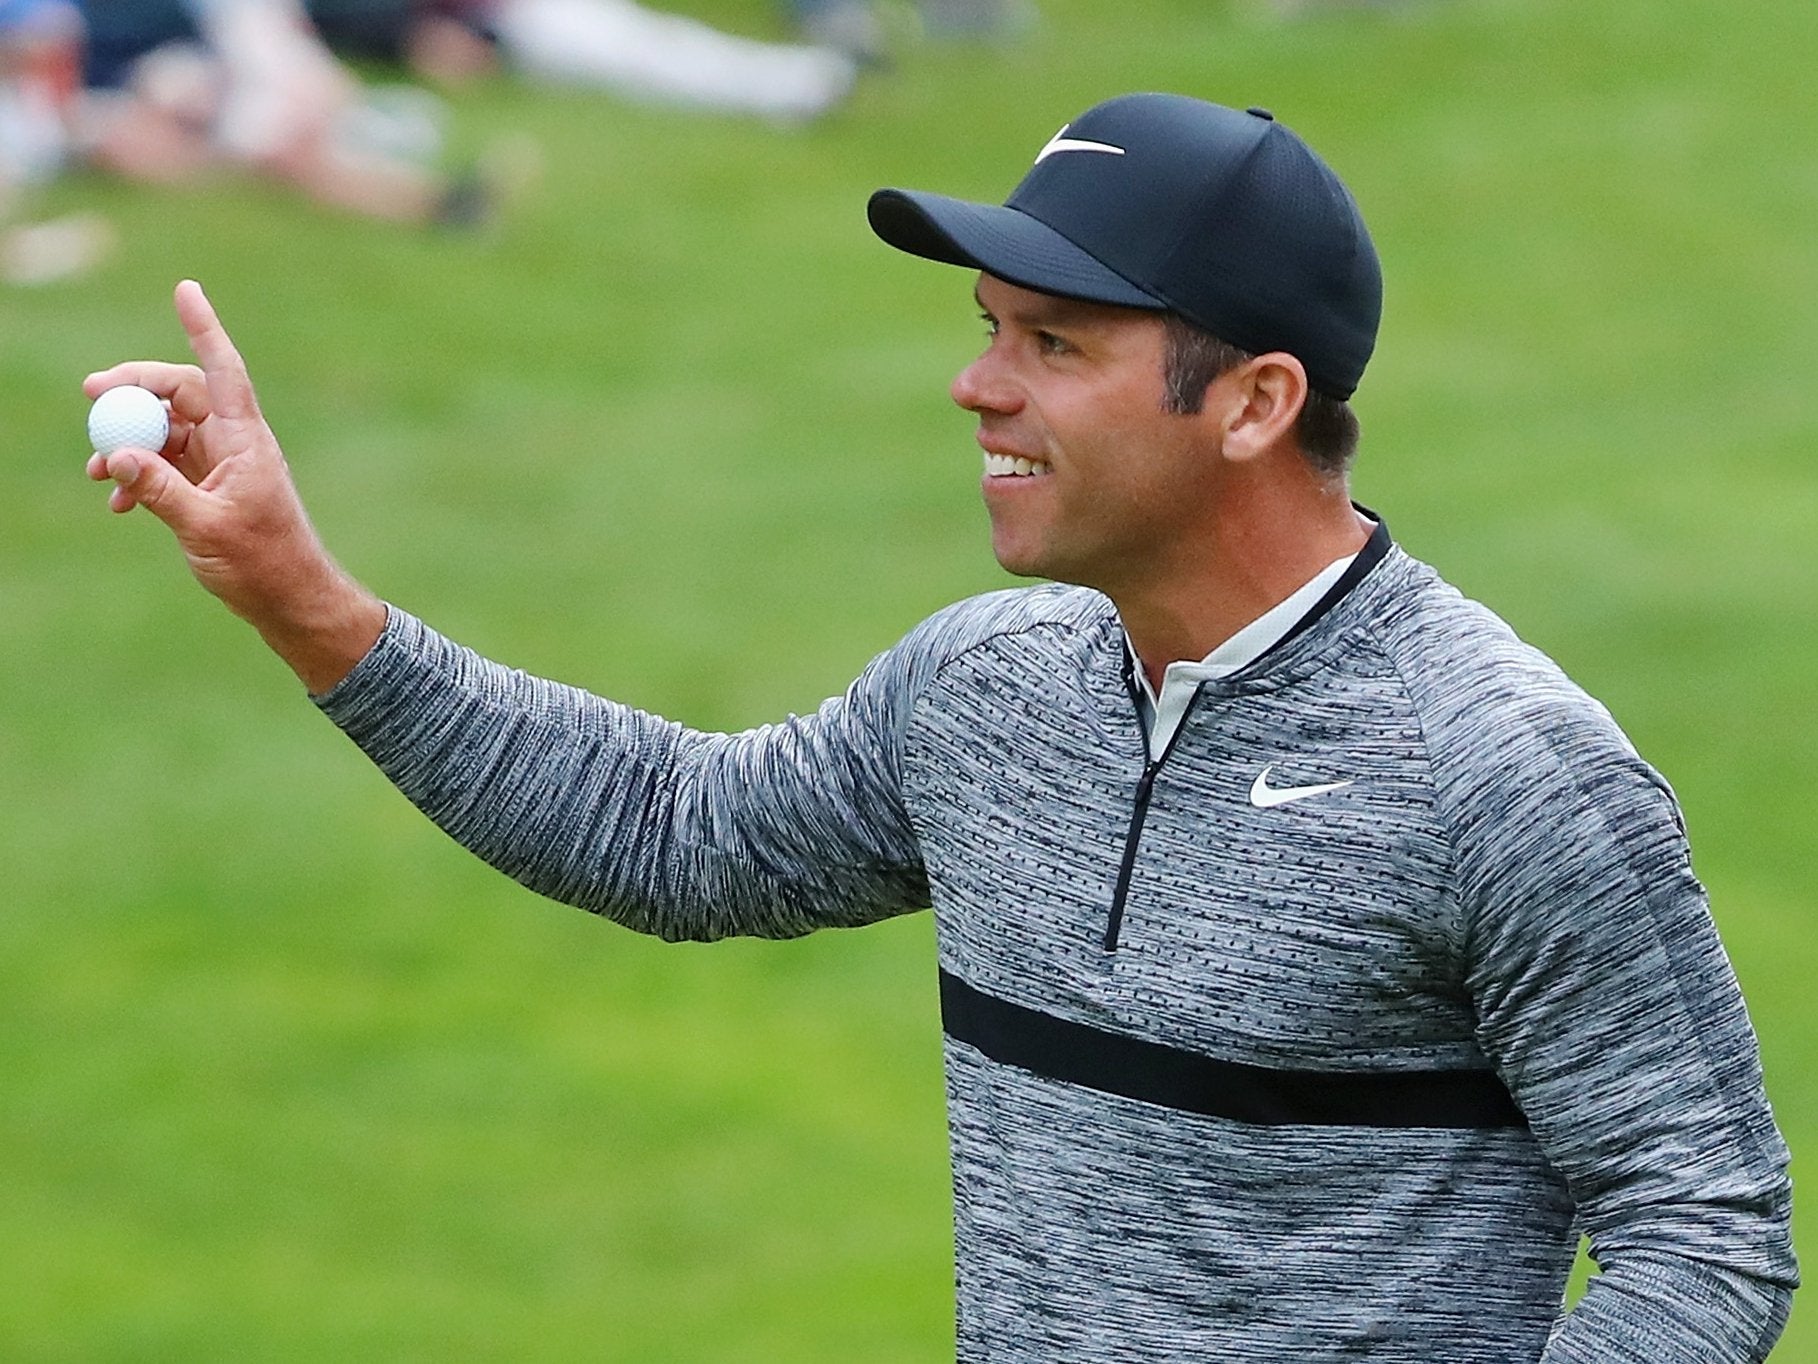 Paul Casey takes a four-shot lead into the final day of the Travelers Championship